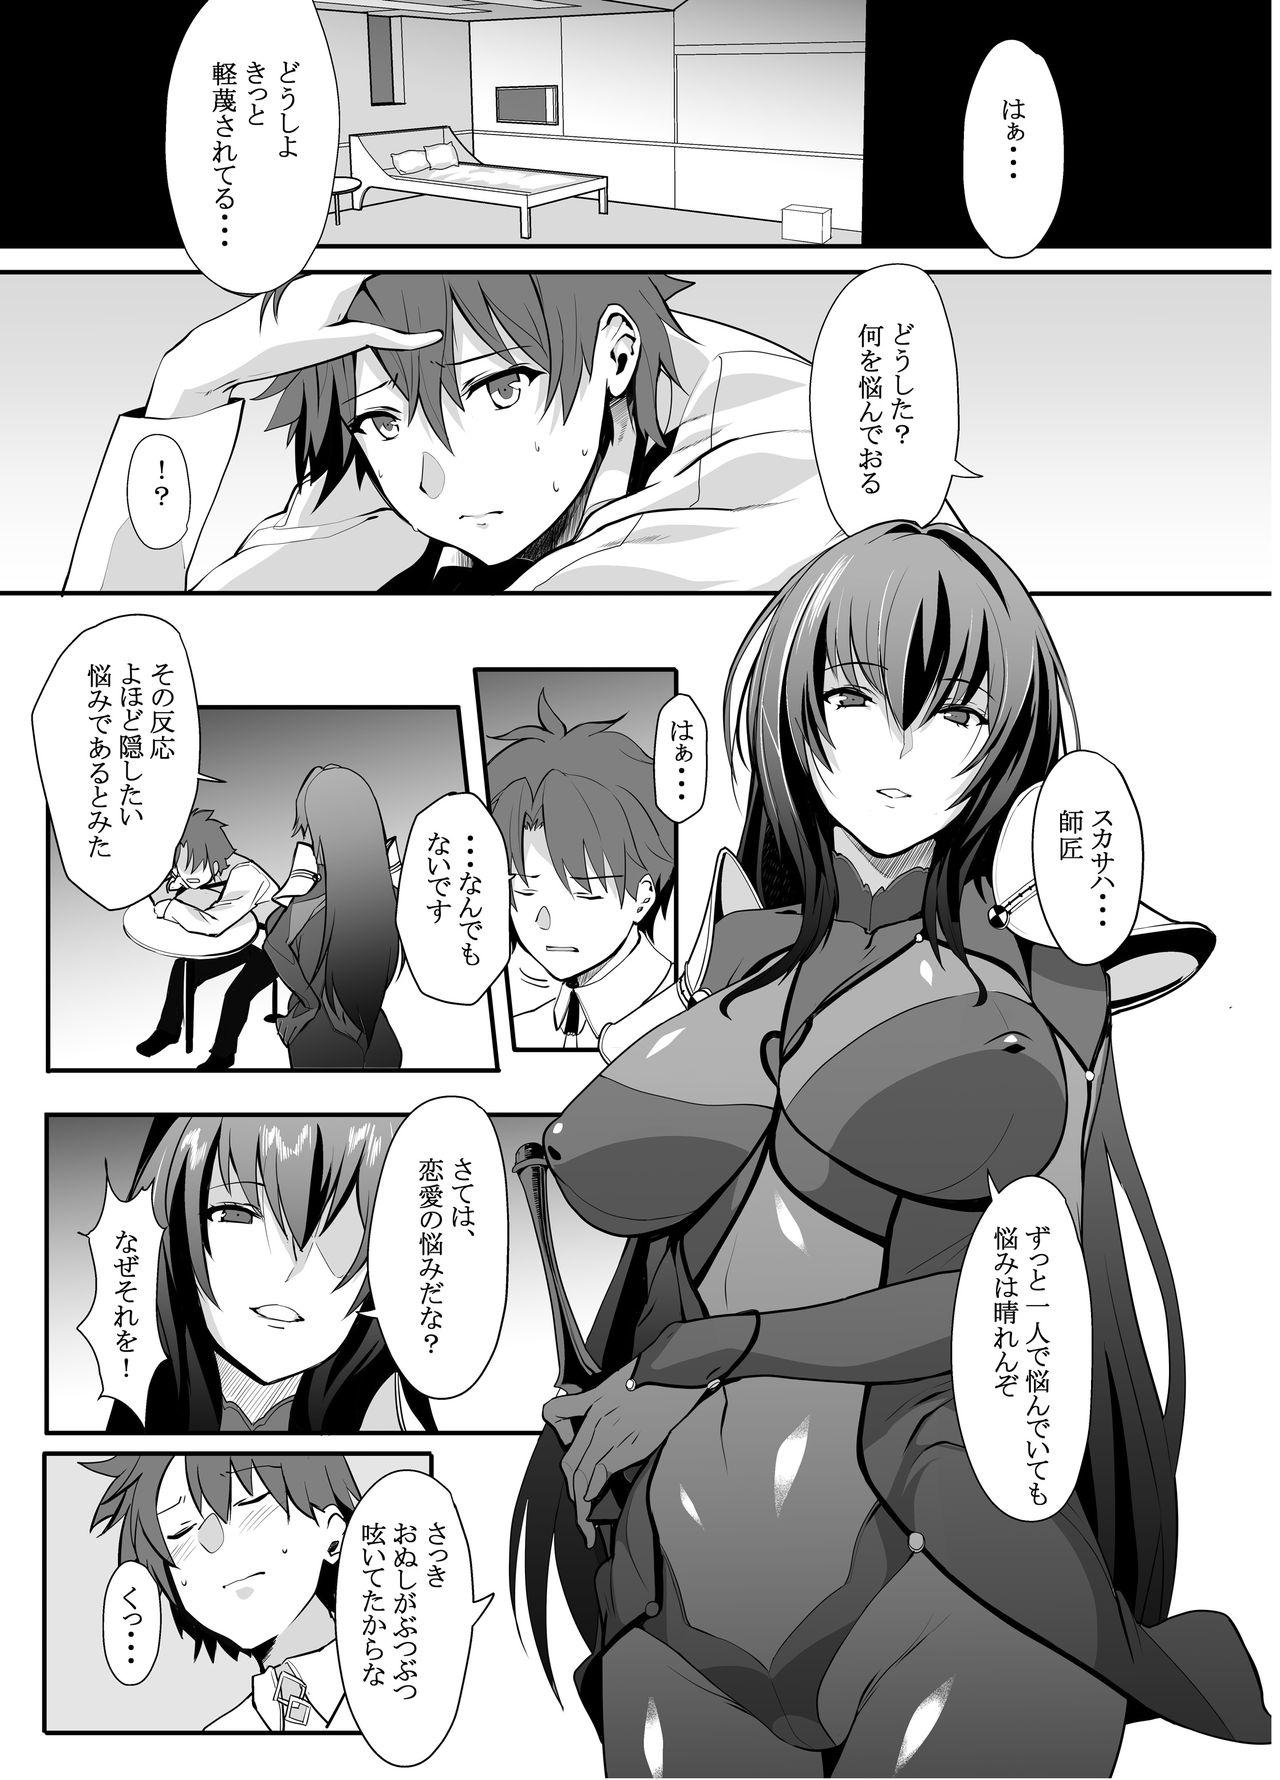 Gagging Scathach Shishou no Dosukebe Lesson - Fate grand order Viet Nam - Page 3